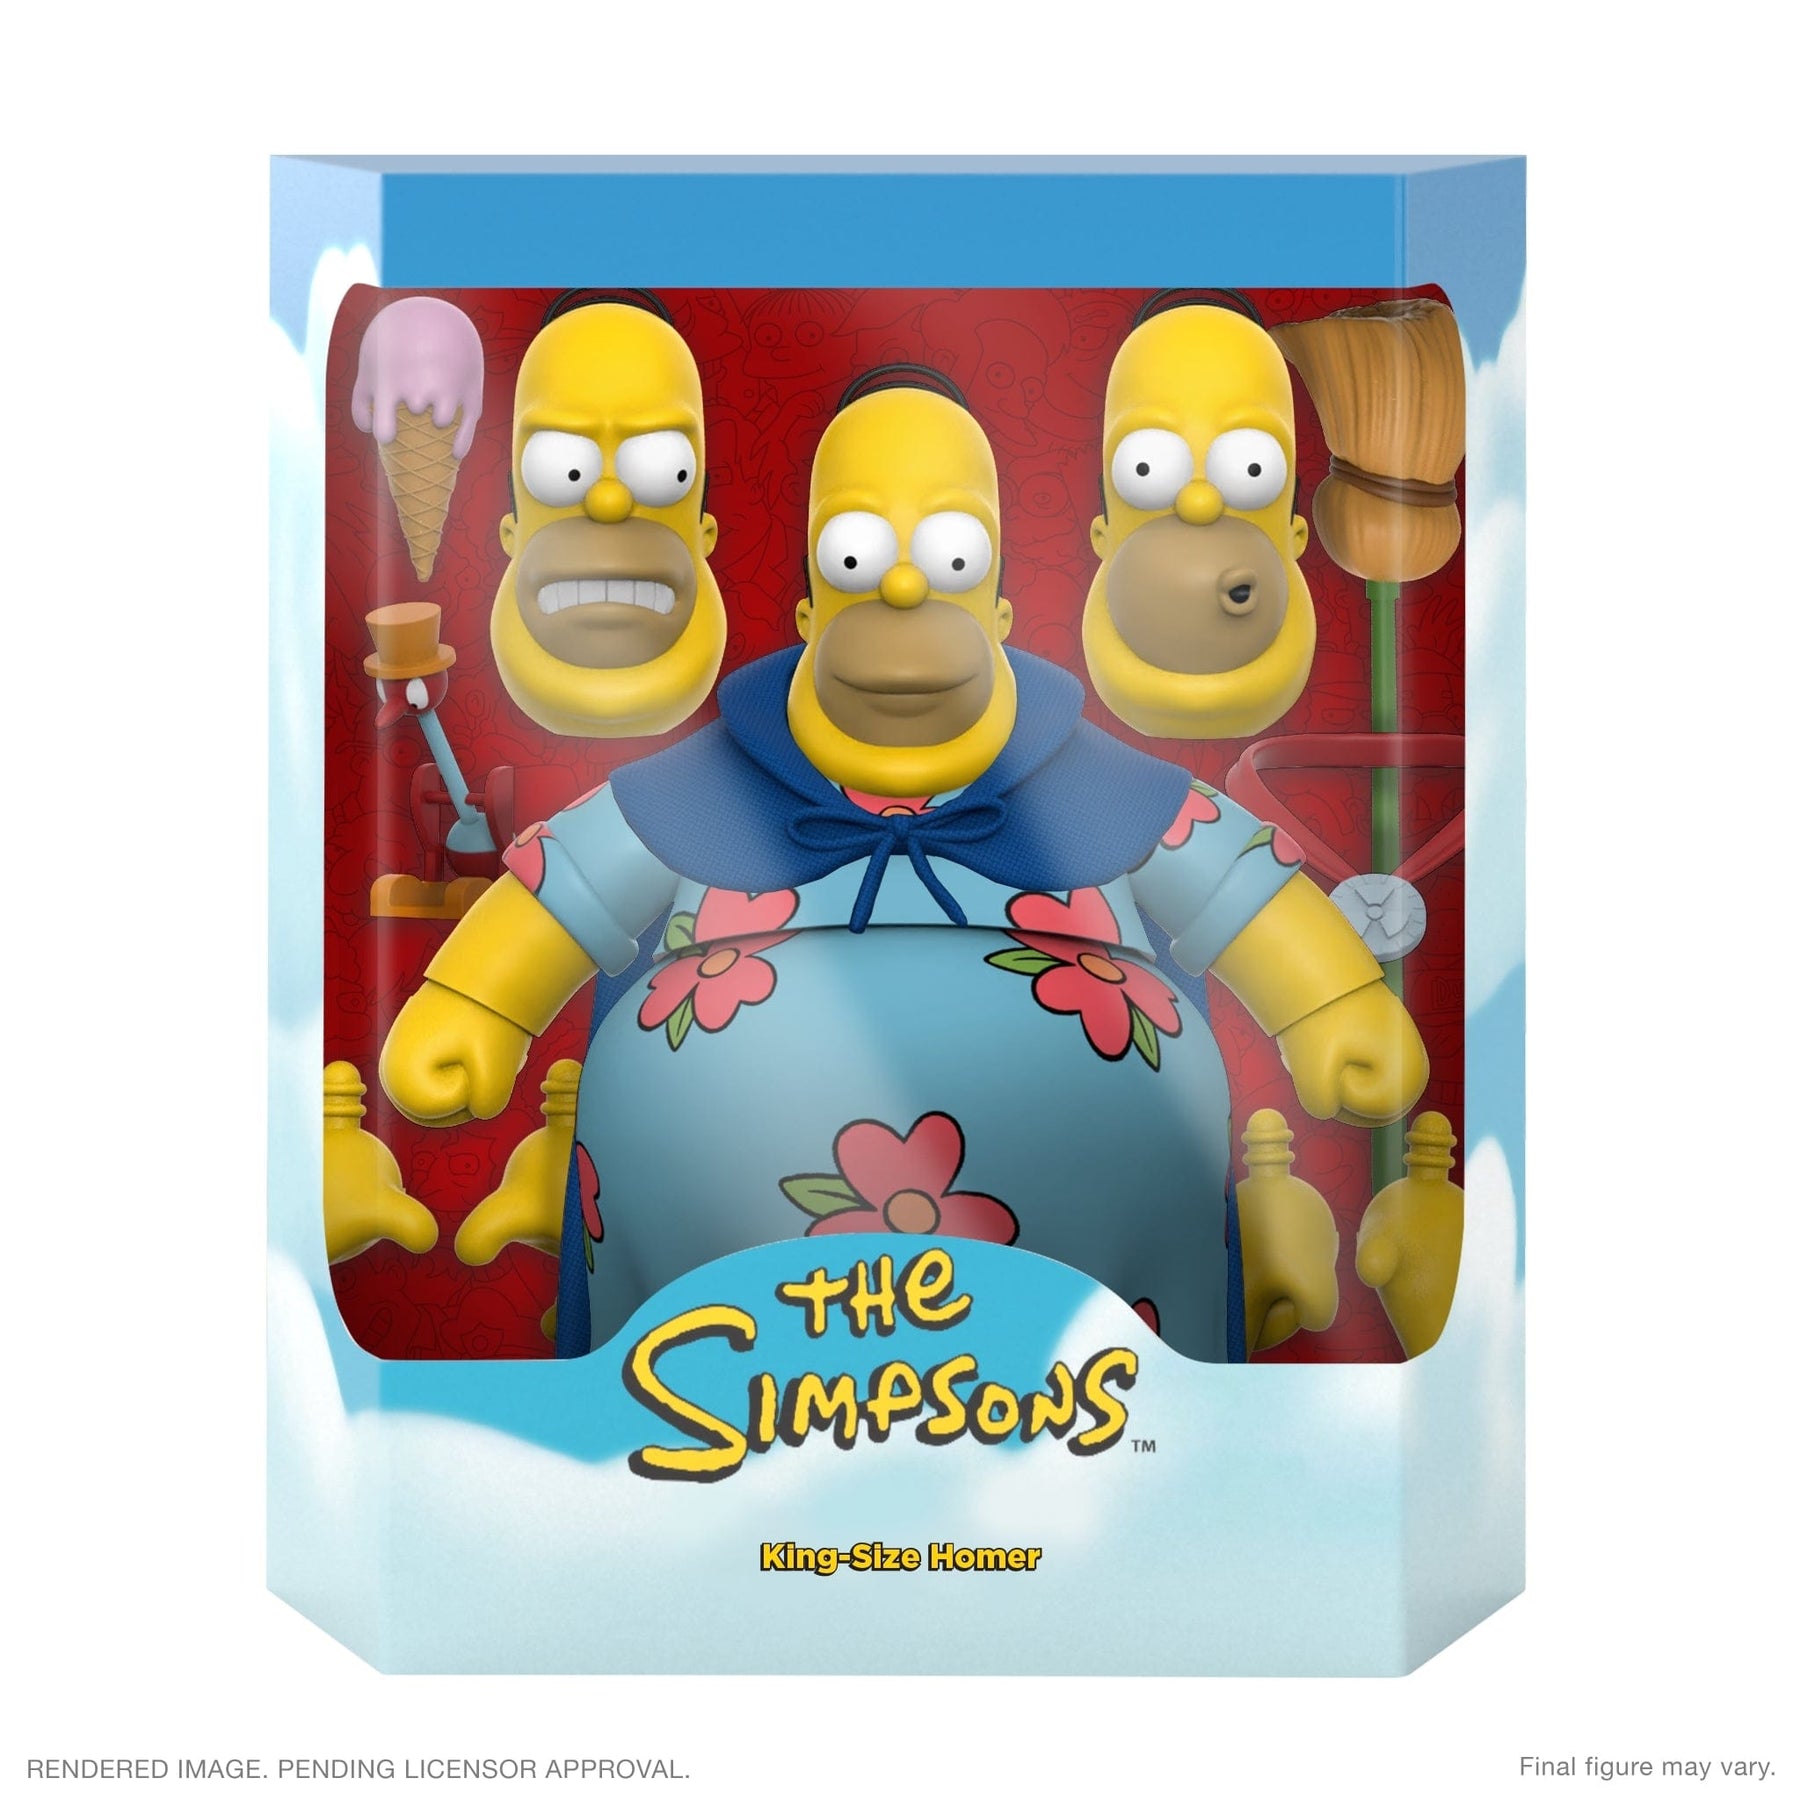 Ultimates!: The Simpsons - King-Size Homer